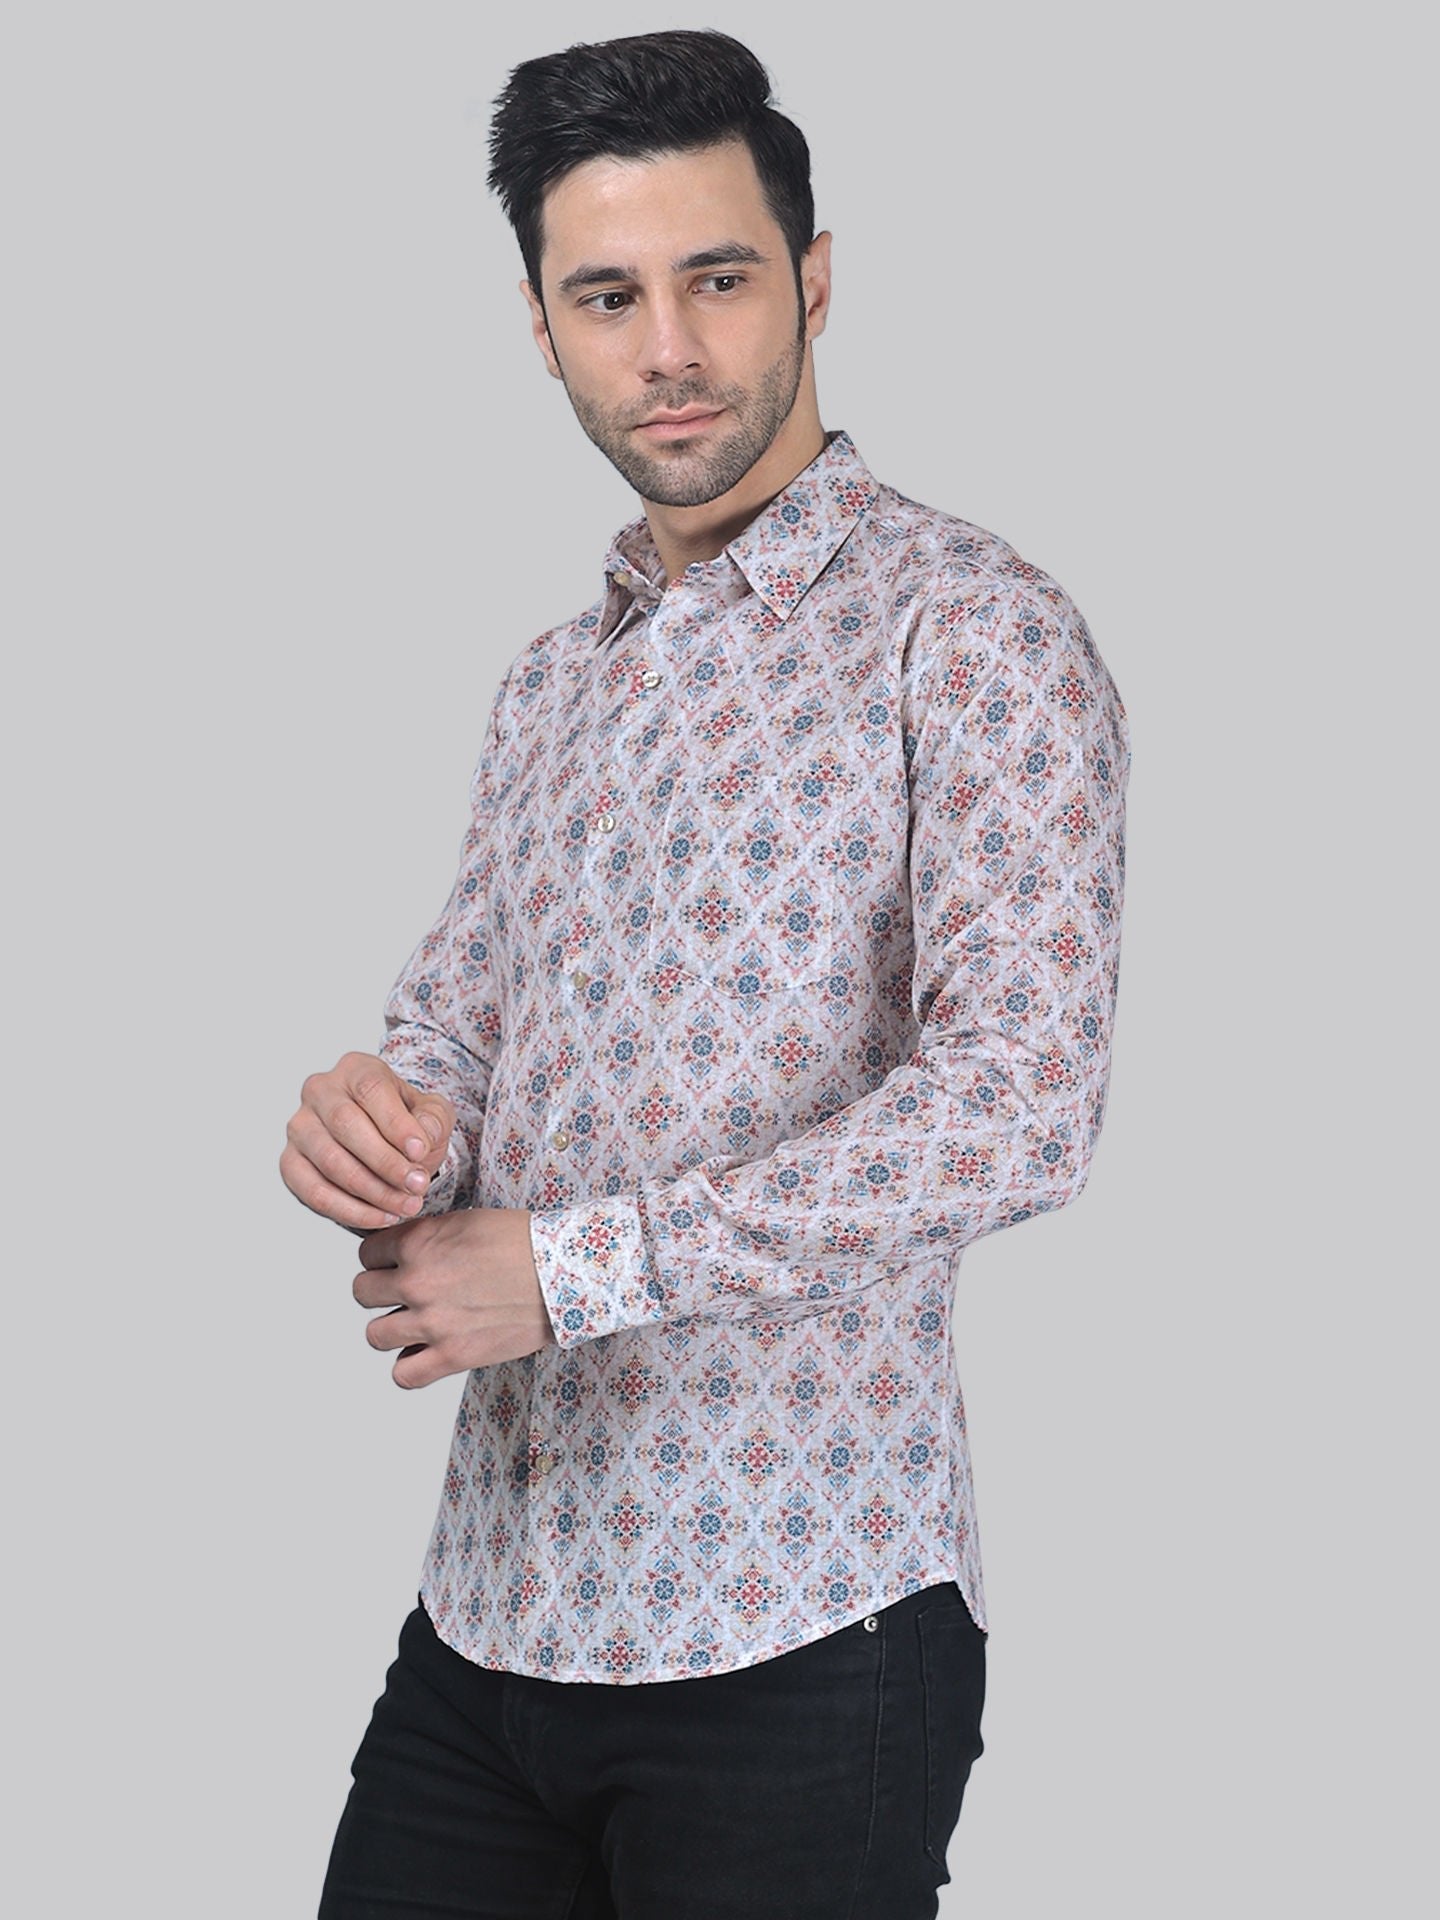 TryBuy Exclusive Men's Printed Full Sleeve Casual Linen Shirt - TryBuy® USA🇺🇸